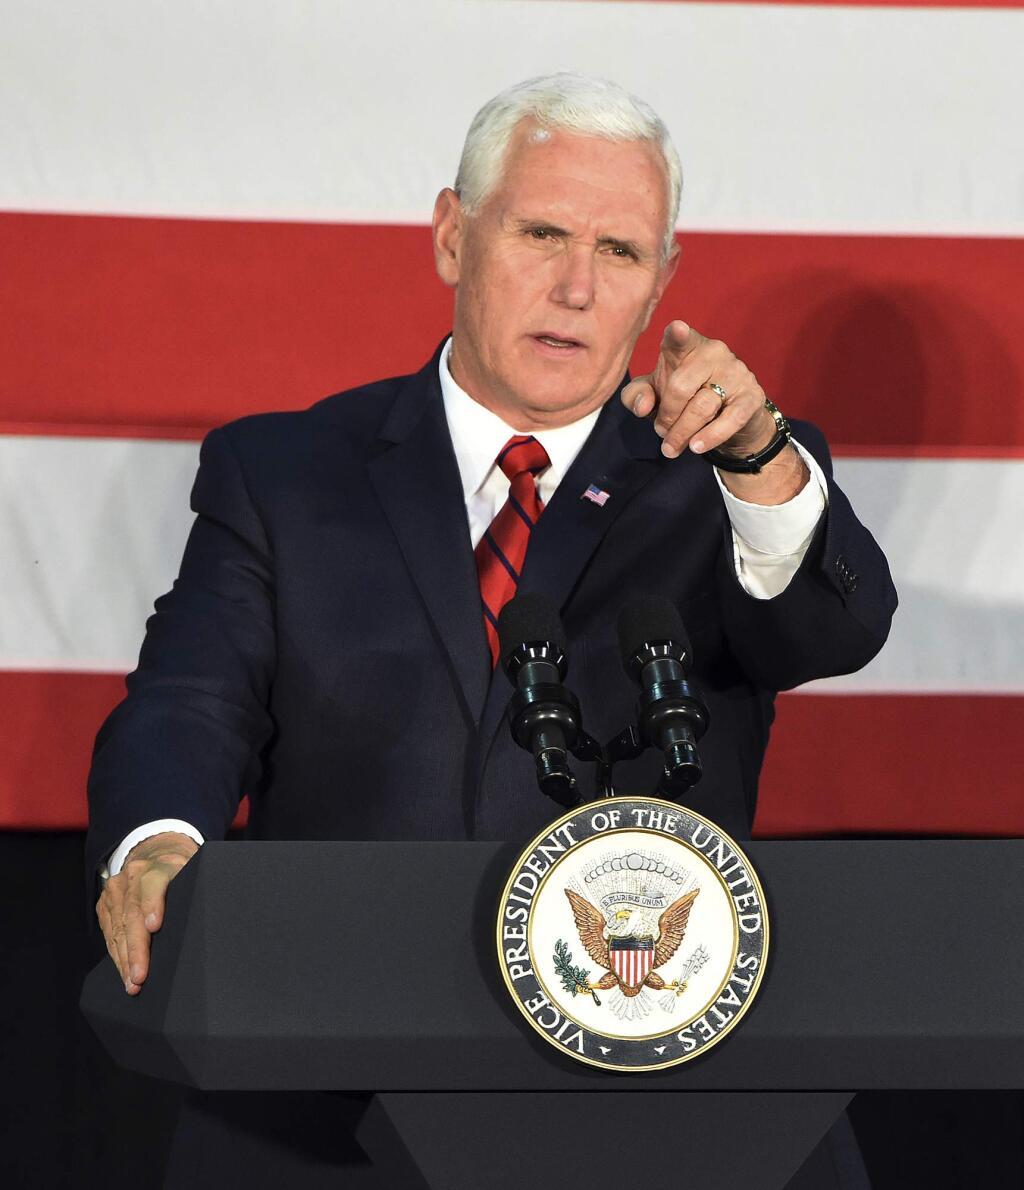 Vice President Mike Pence makes a campaign stop to support Sen. Luther Strange in Birmingham, Ala., Monday, Sept. 25, 2017. President Donald Trump called an Alabama radio show Monday to urge support for Strange in Tuesday's runoff for the GOP nomination, and Pence campaigned for Strange in Birmingham while Trump's former strategist, Steve Bannon, spoke at a Roy Moore rally at the coast. (Joe Songer/AL.com via AP)